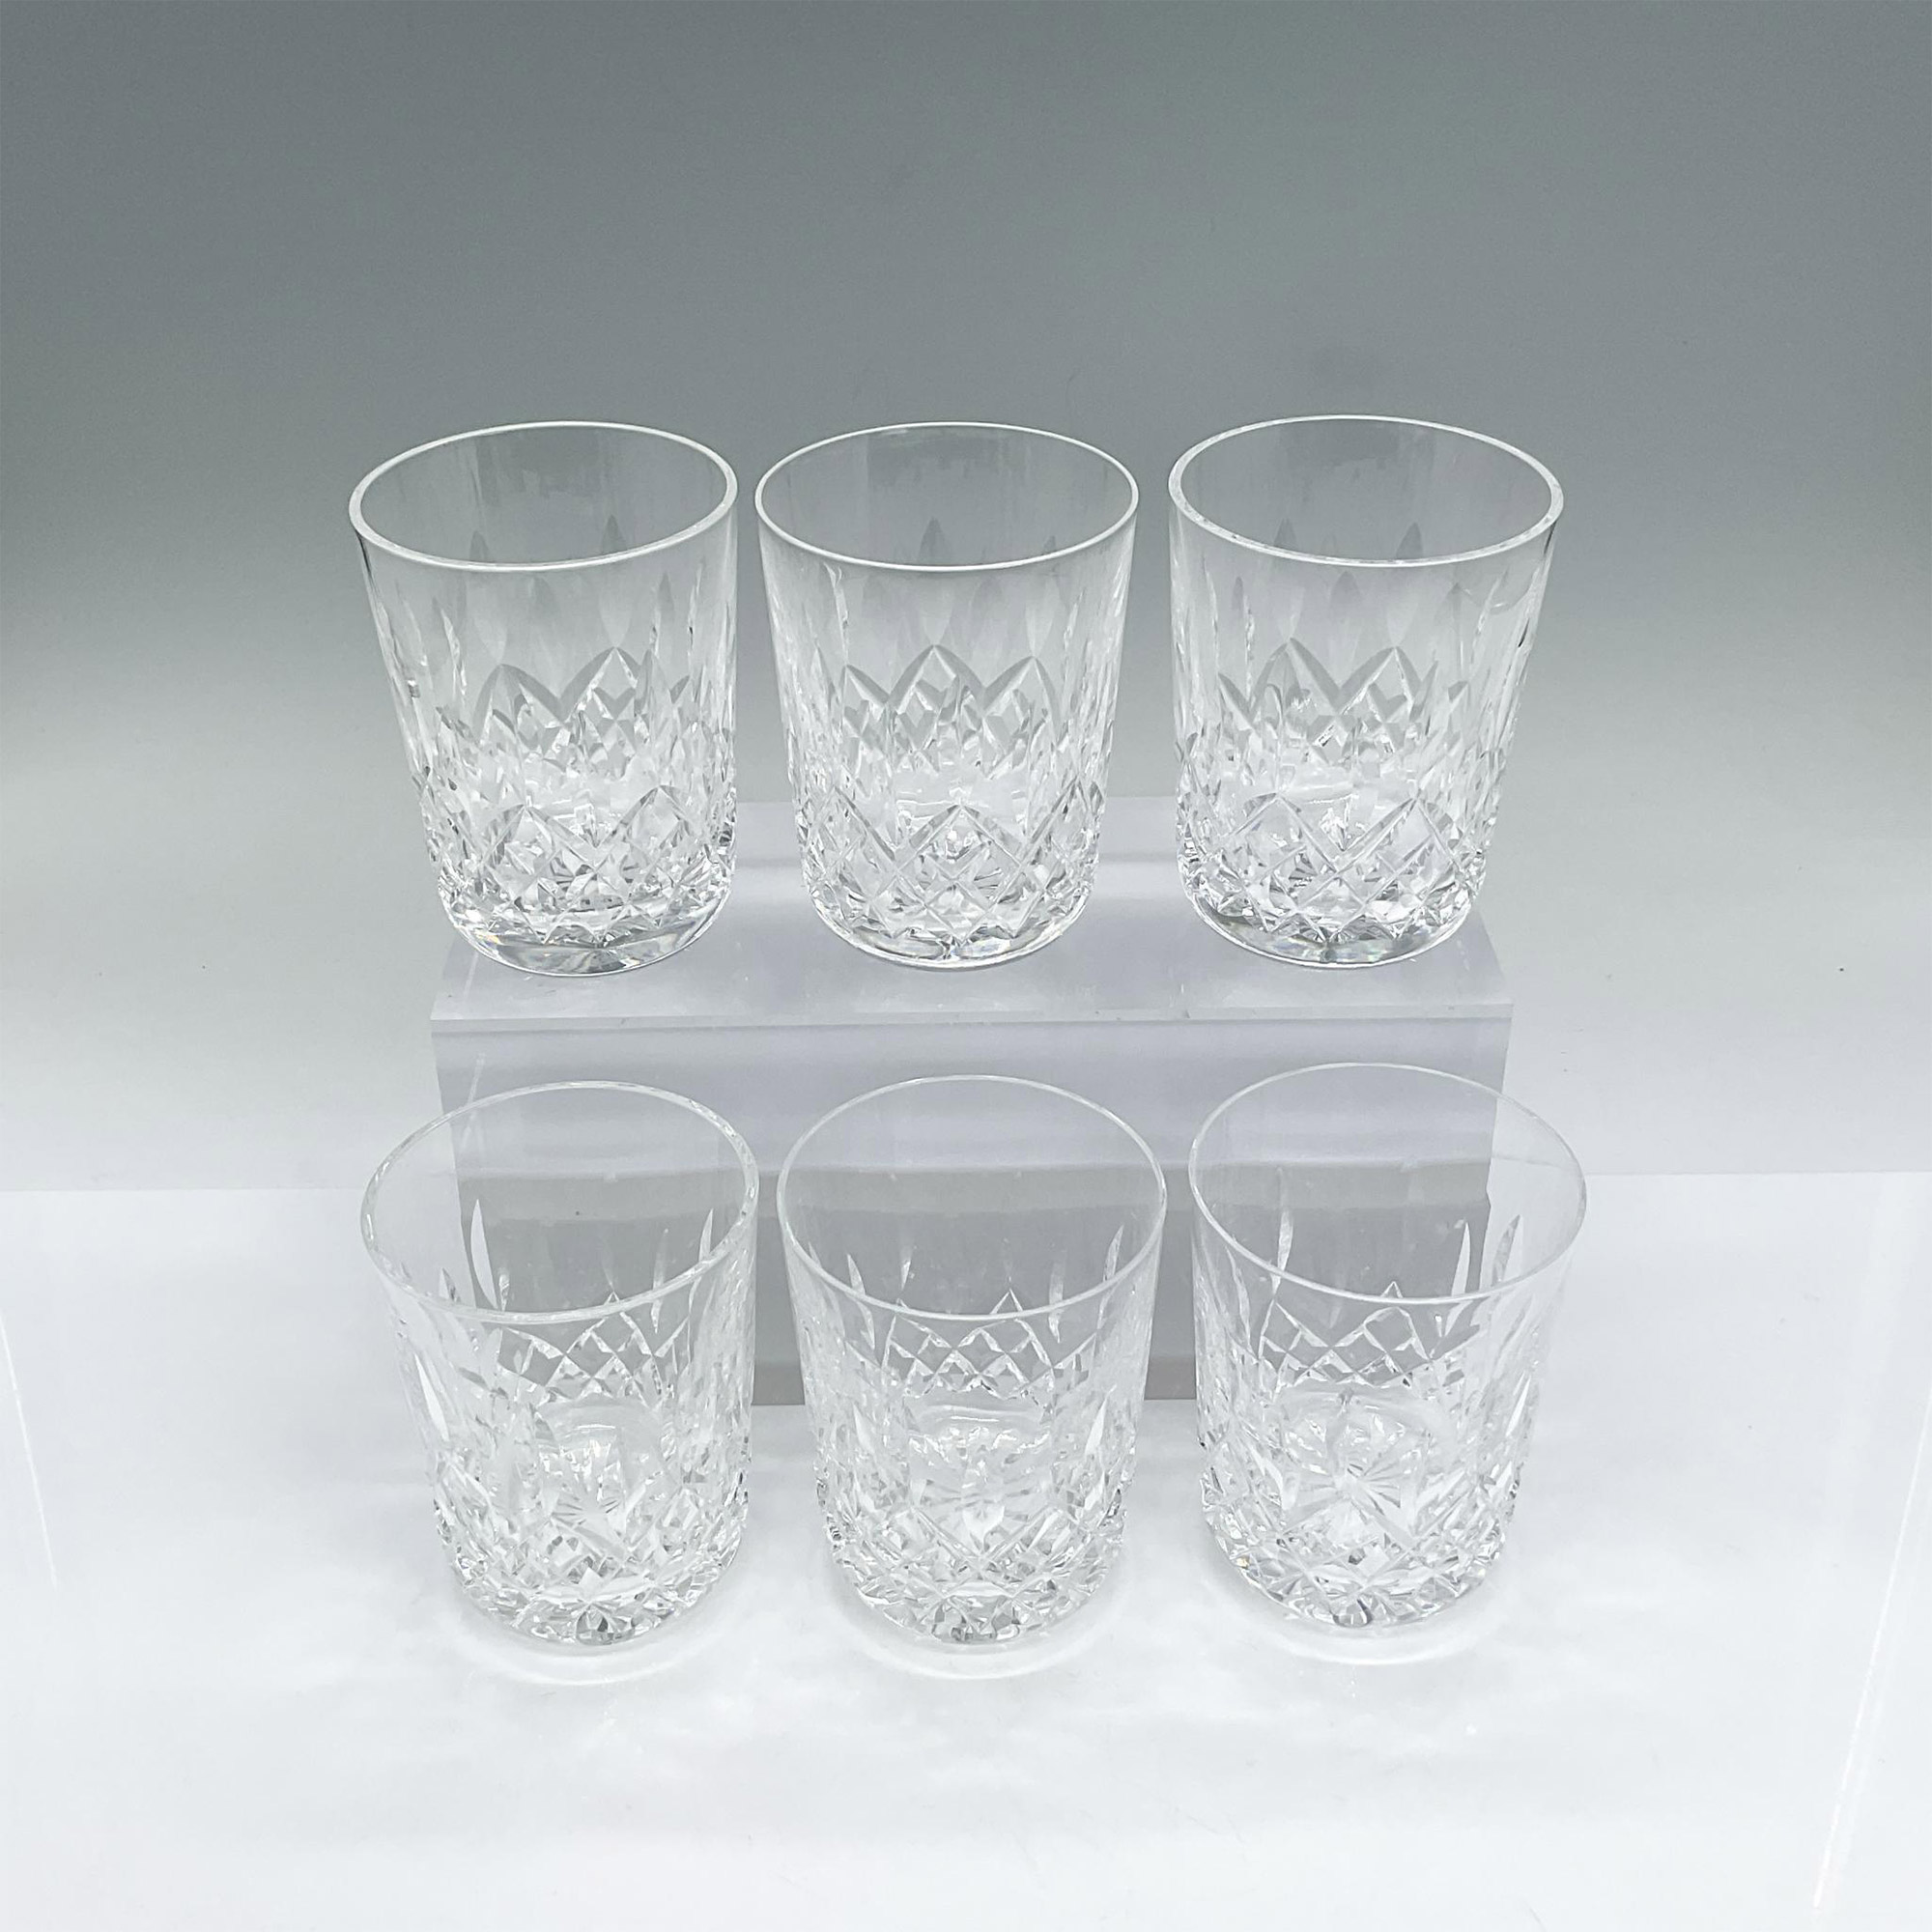 6pc Waterford Crystal Old Fashioned Glasses, Lismore - Image 2 of 3